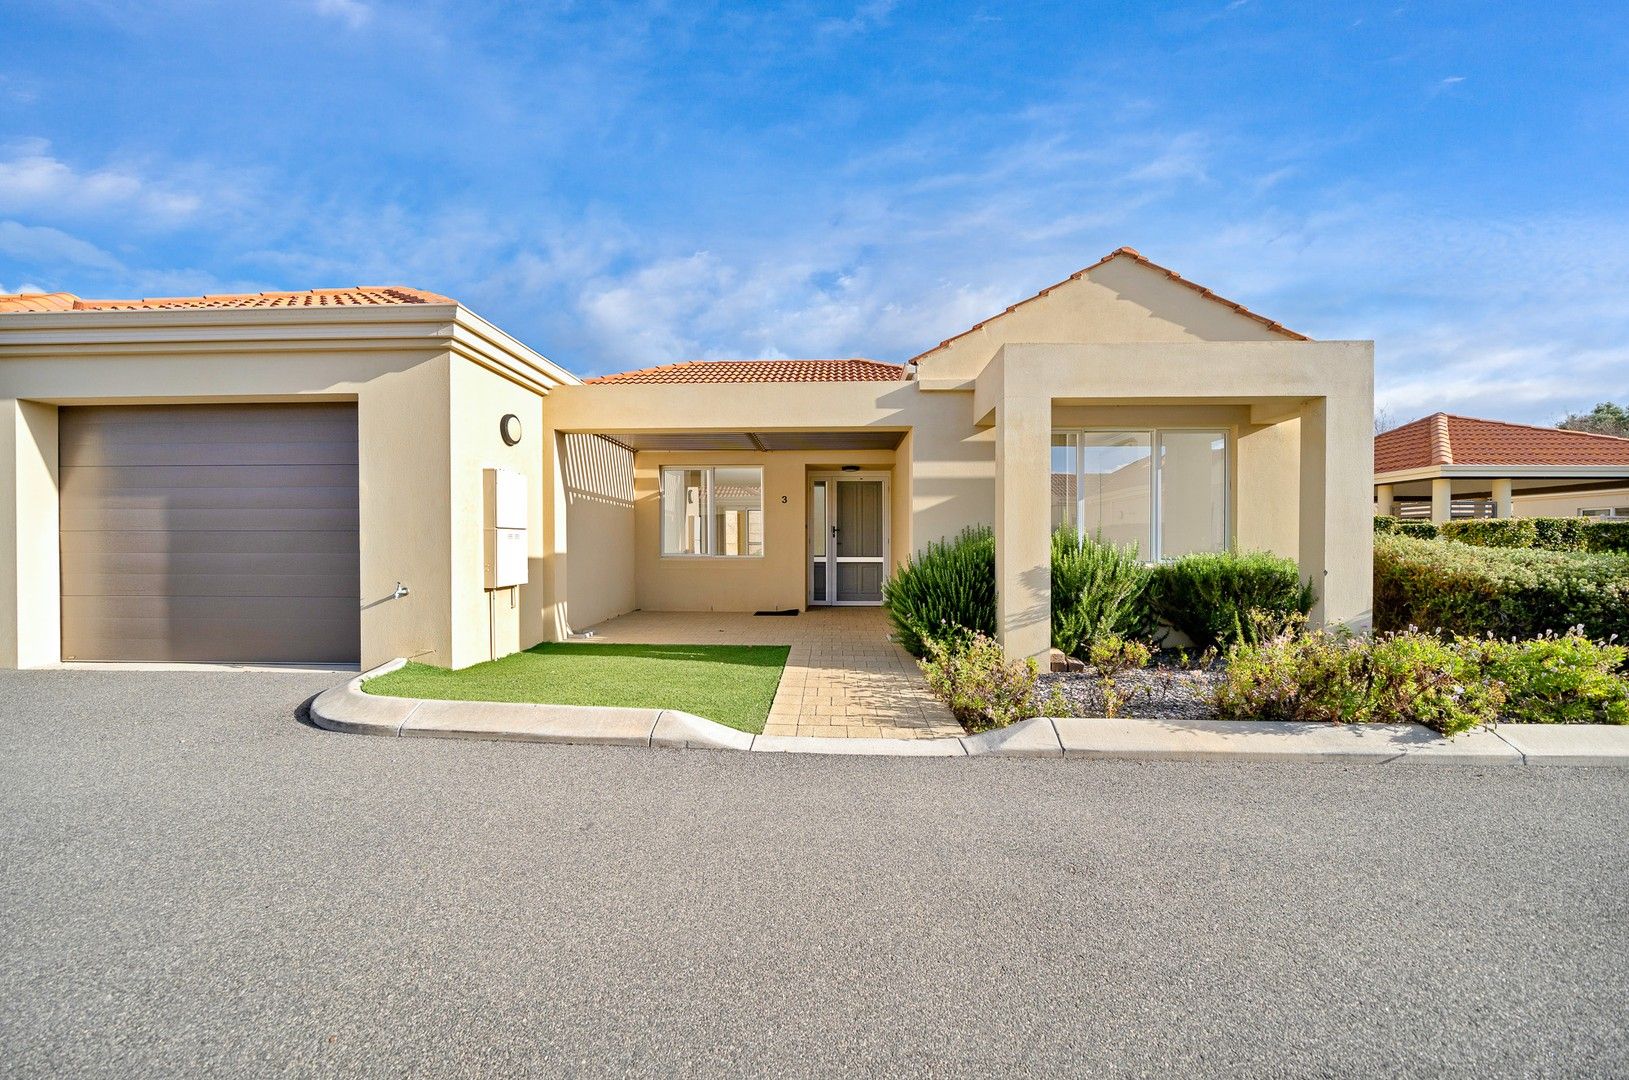 3 bedrooms House in 3/27 Gorham Way SPEARWOOD WA, 6163